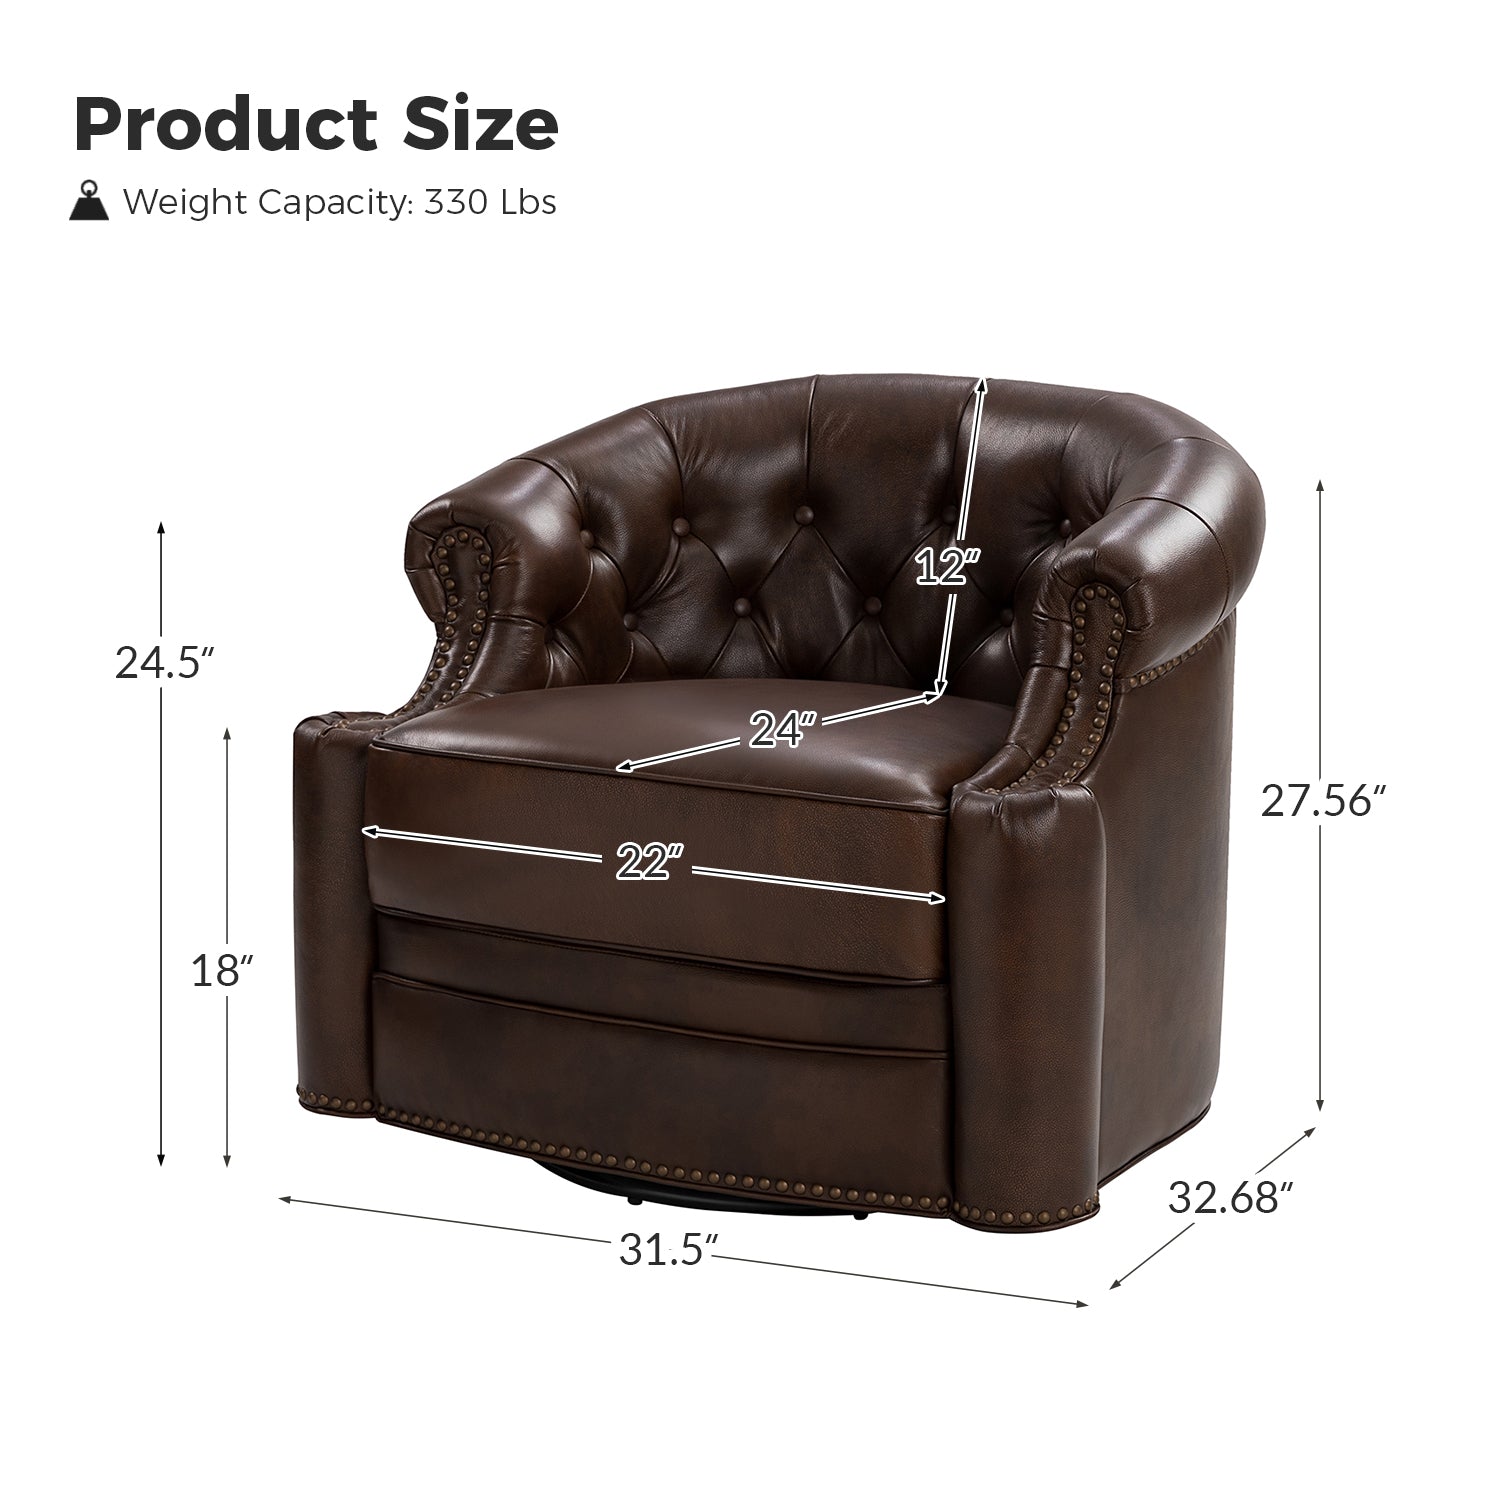 Alonso Classic Chesterfield Genuine Leather Swivel Chair